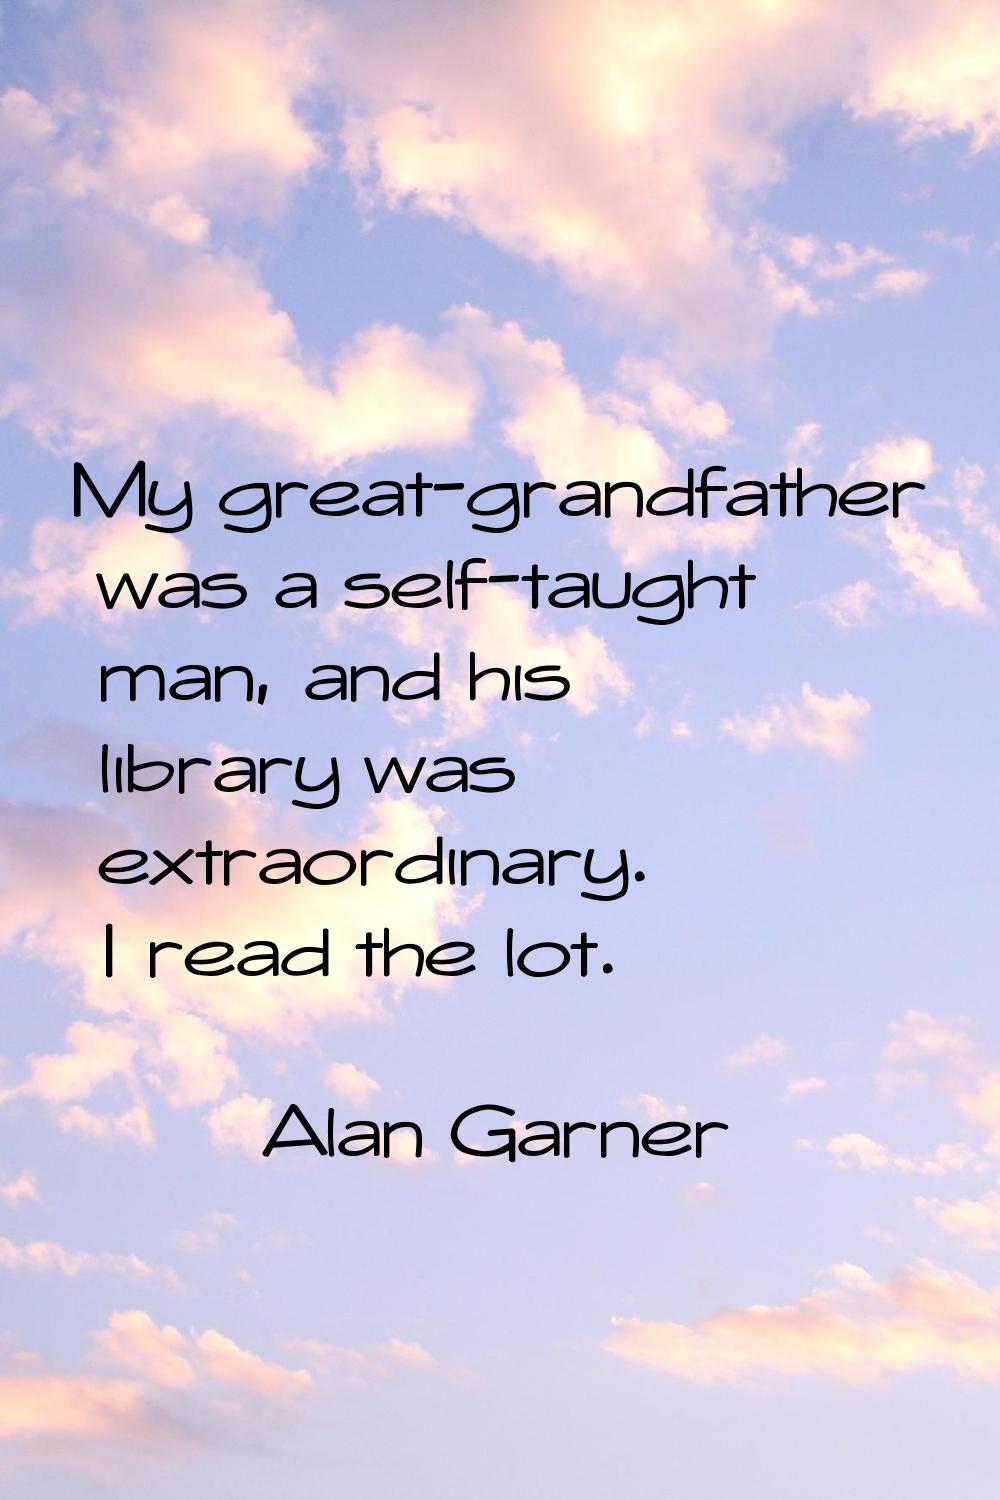 My great-grandfather was a self-taught man, and his library was extraordinary. I read the lot.